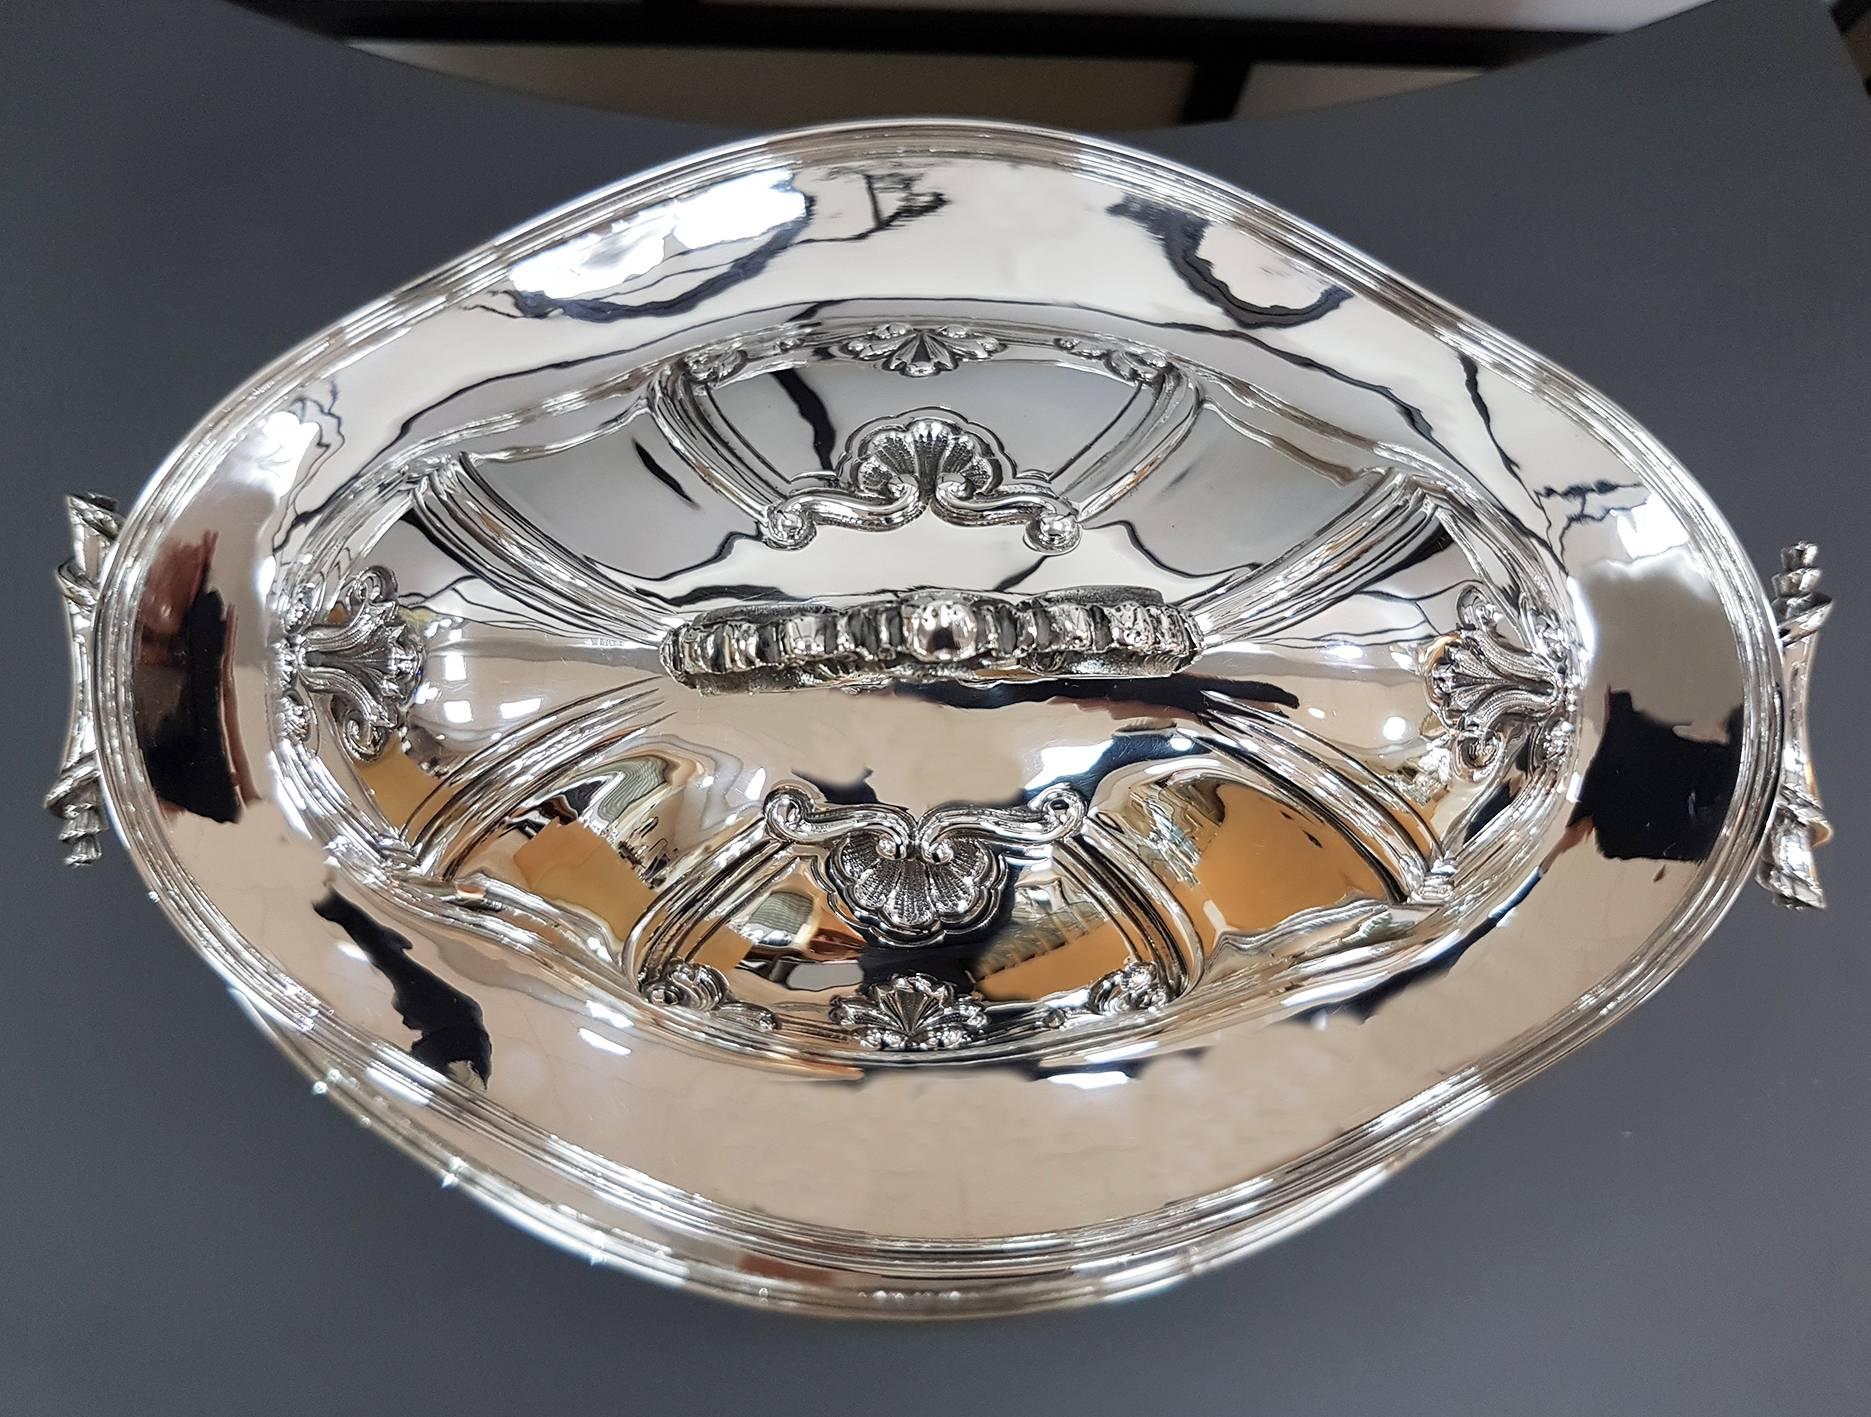 Oval tureen in Strerling Silver, baroque style with handles and feet made of cast.
The tureen is embossed and chiseled with shells, typical of the Baroque style.
The dish is shaped following the shape and design of the tureen. 
3080 grams
Tray cm.